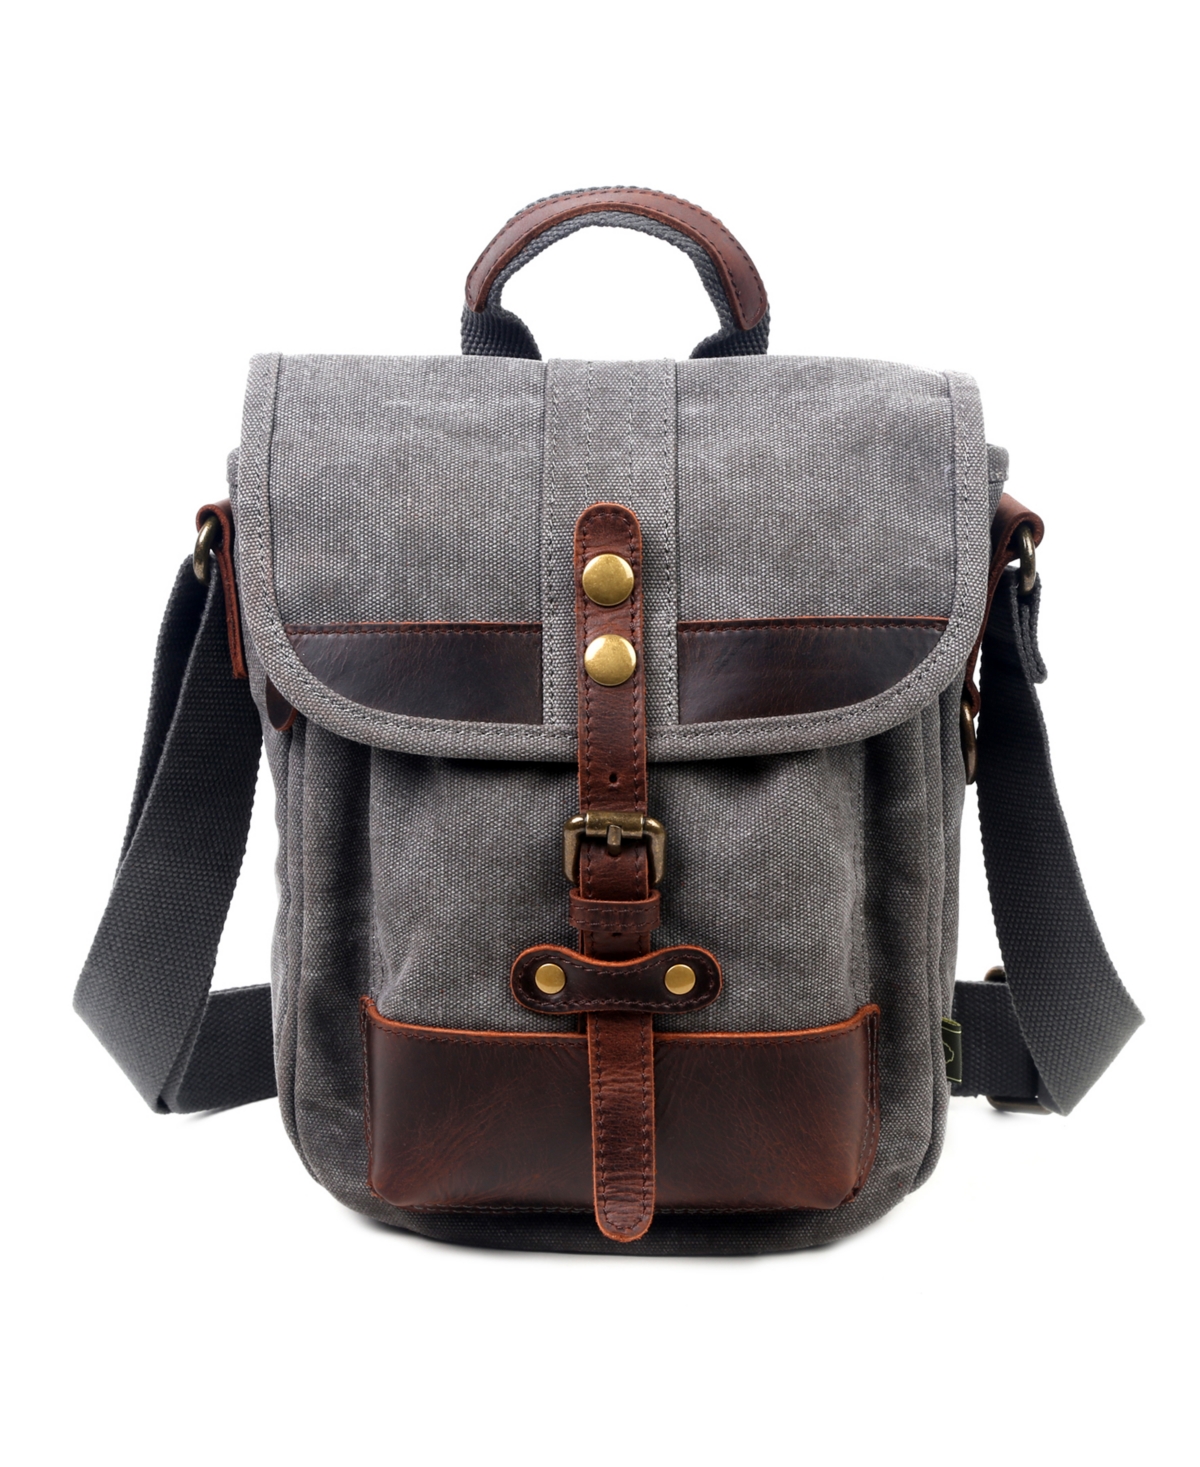 Valley Trail Canvas Messenger Bag - Gray